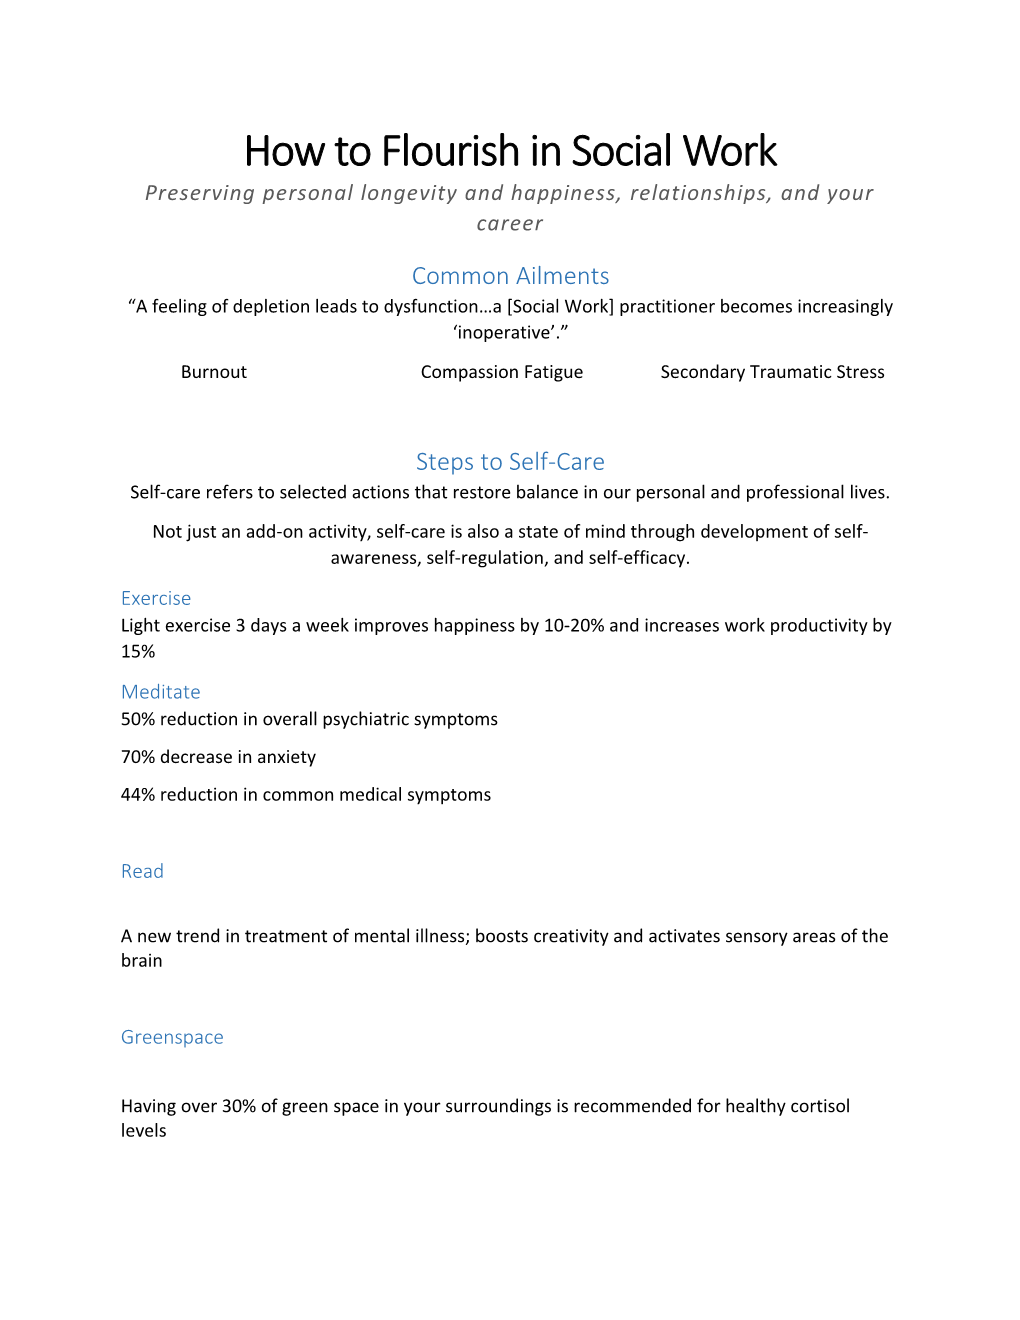 How to Flourish in Social Work